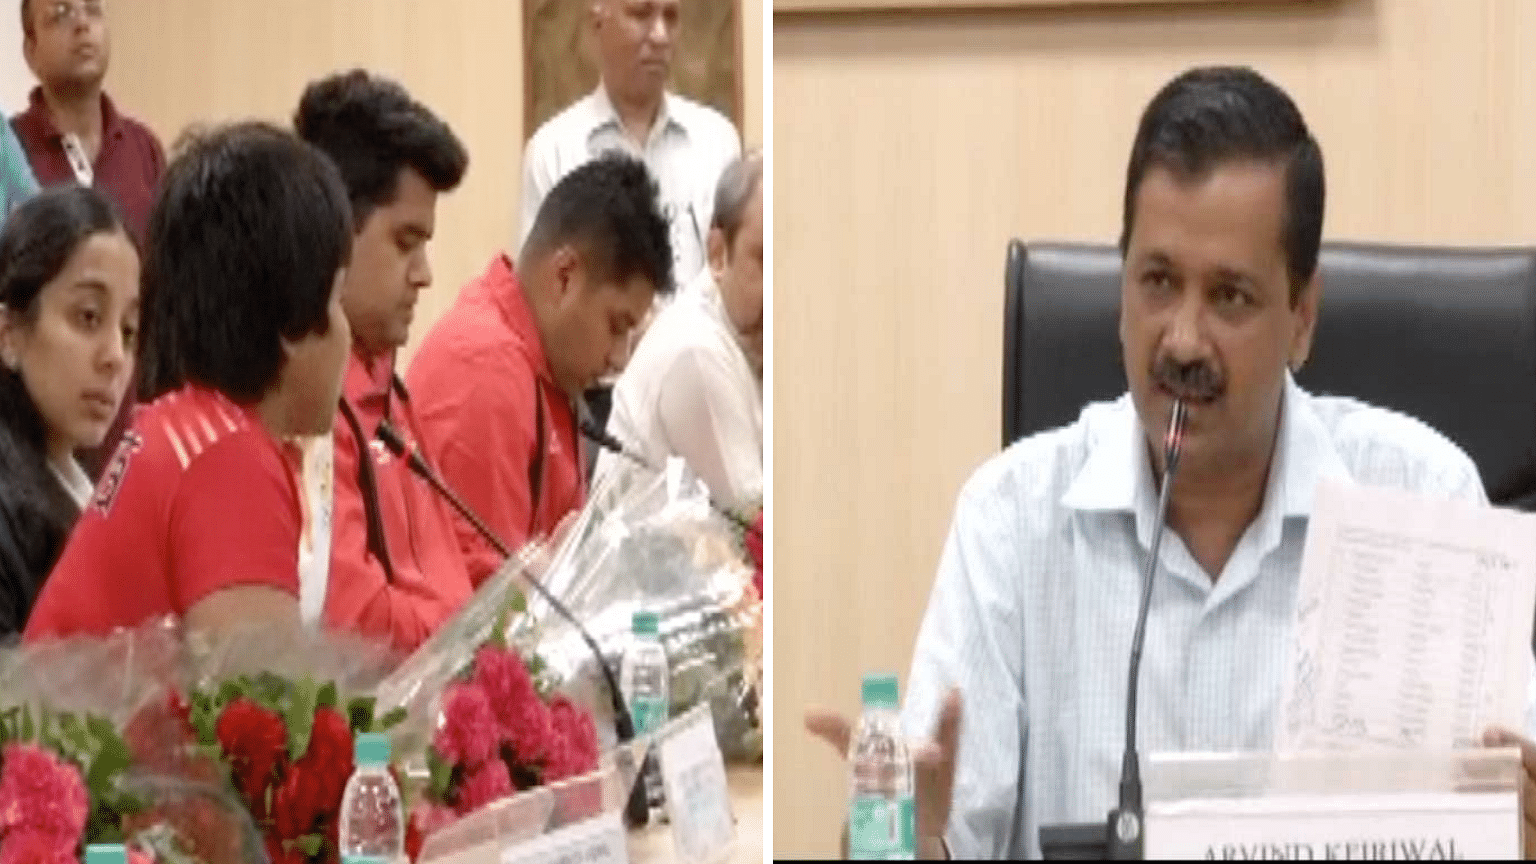 Asian and Commonwealth Games medallist Divya Kakran told Delhi CM Arvind Kejriwal about the lack of support and facilities for sportspersons in Delhi.